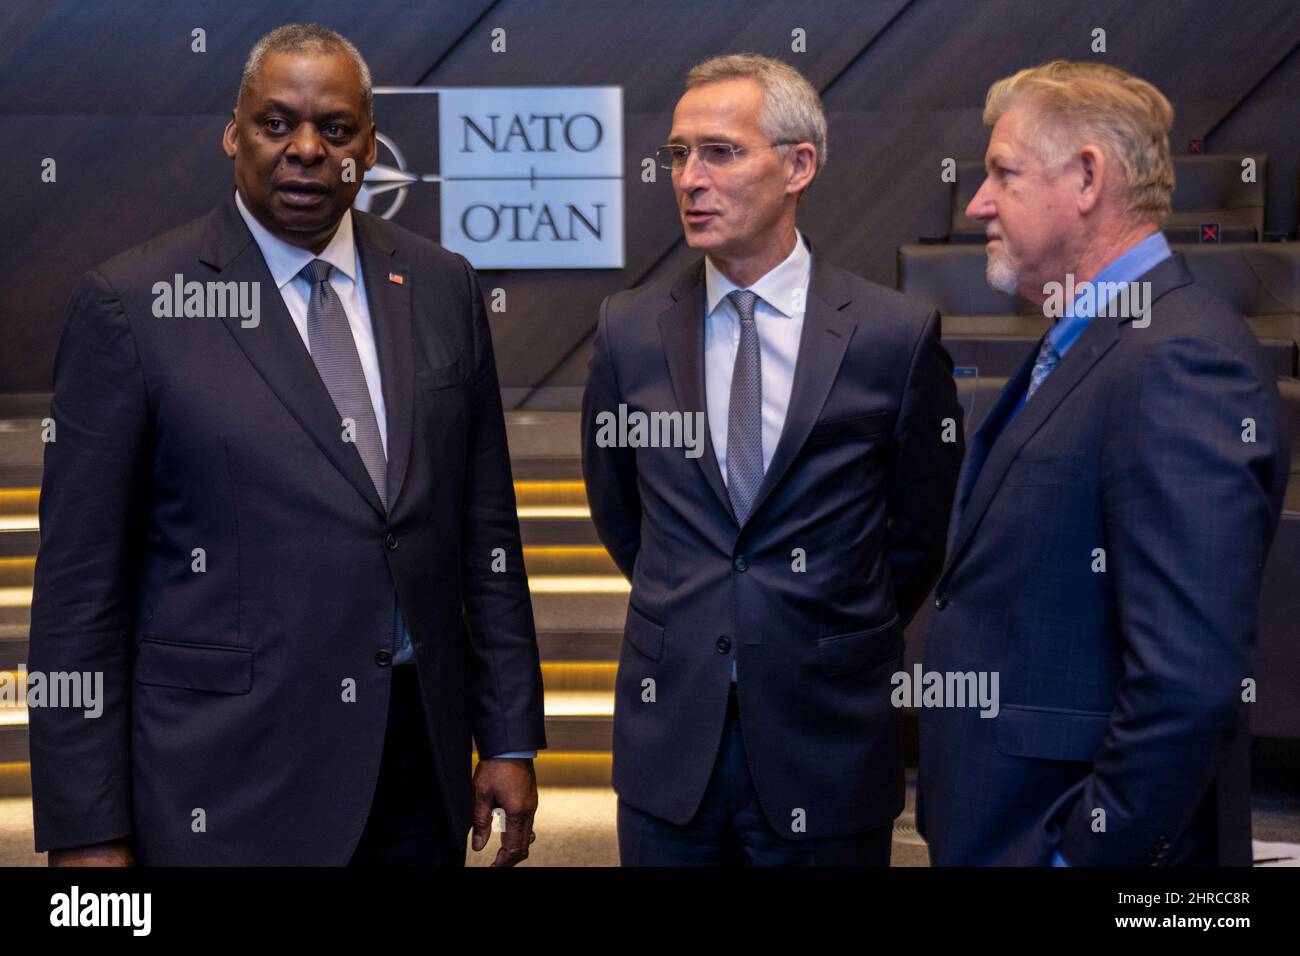 Secretary of Defense Lloyd J. Austin III speaks with NATO Secretary General Jens Stoltenbergat and John Manza, NATO Assistant Secretary General for Operations at the NATO defense ministerial in Brussels, Belgium, Oct. 22, 2021. NATO leaders are conducting their first in-person defense ministerial since the beginning of the COVID-19 pandemic to chart the course for the alliance as it modernizes and adapts to a world dominated by strategic competition. (Department of Defense photo by Chad J. McNeeley) Stock Photo